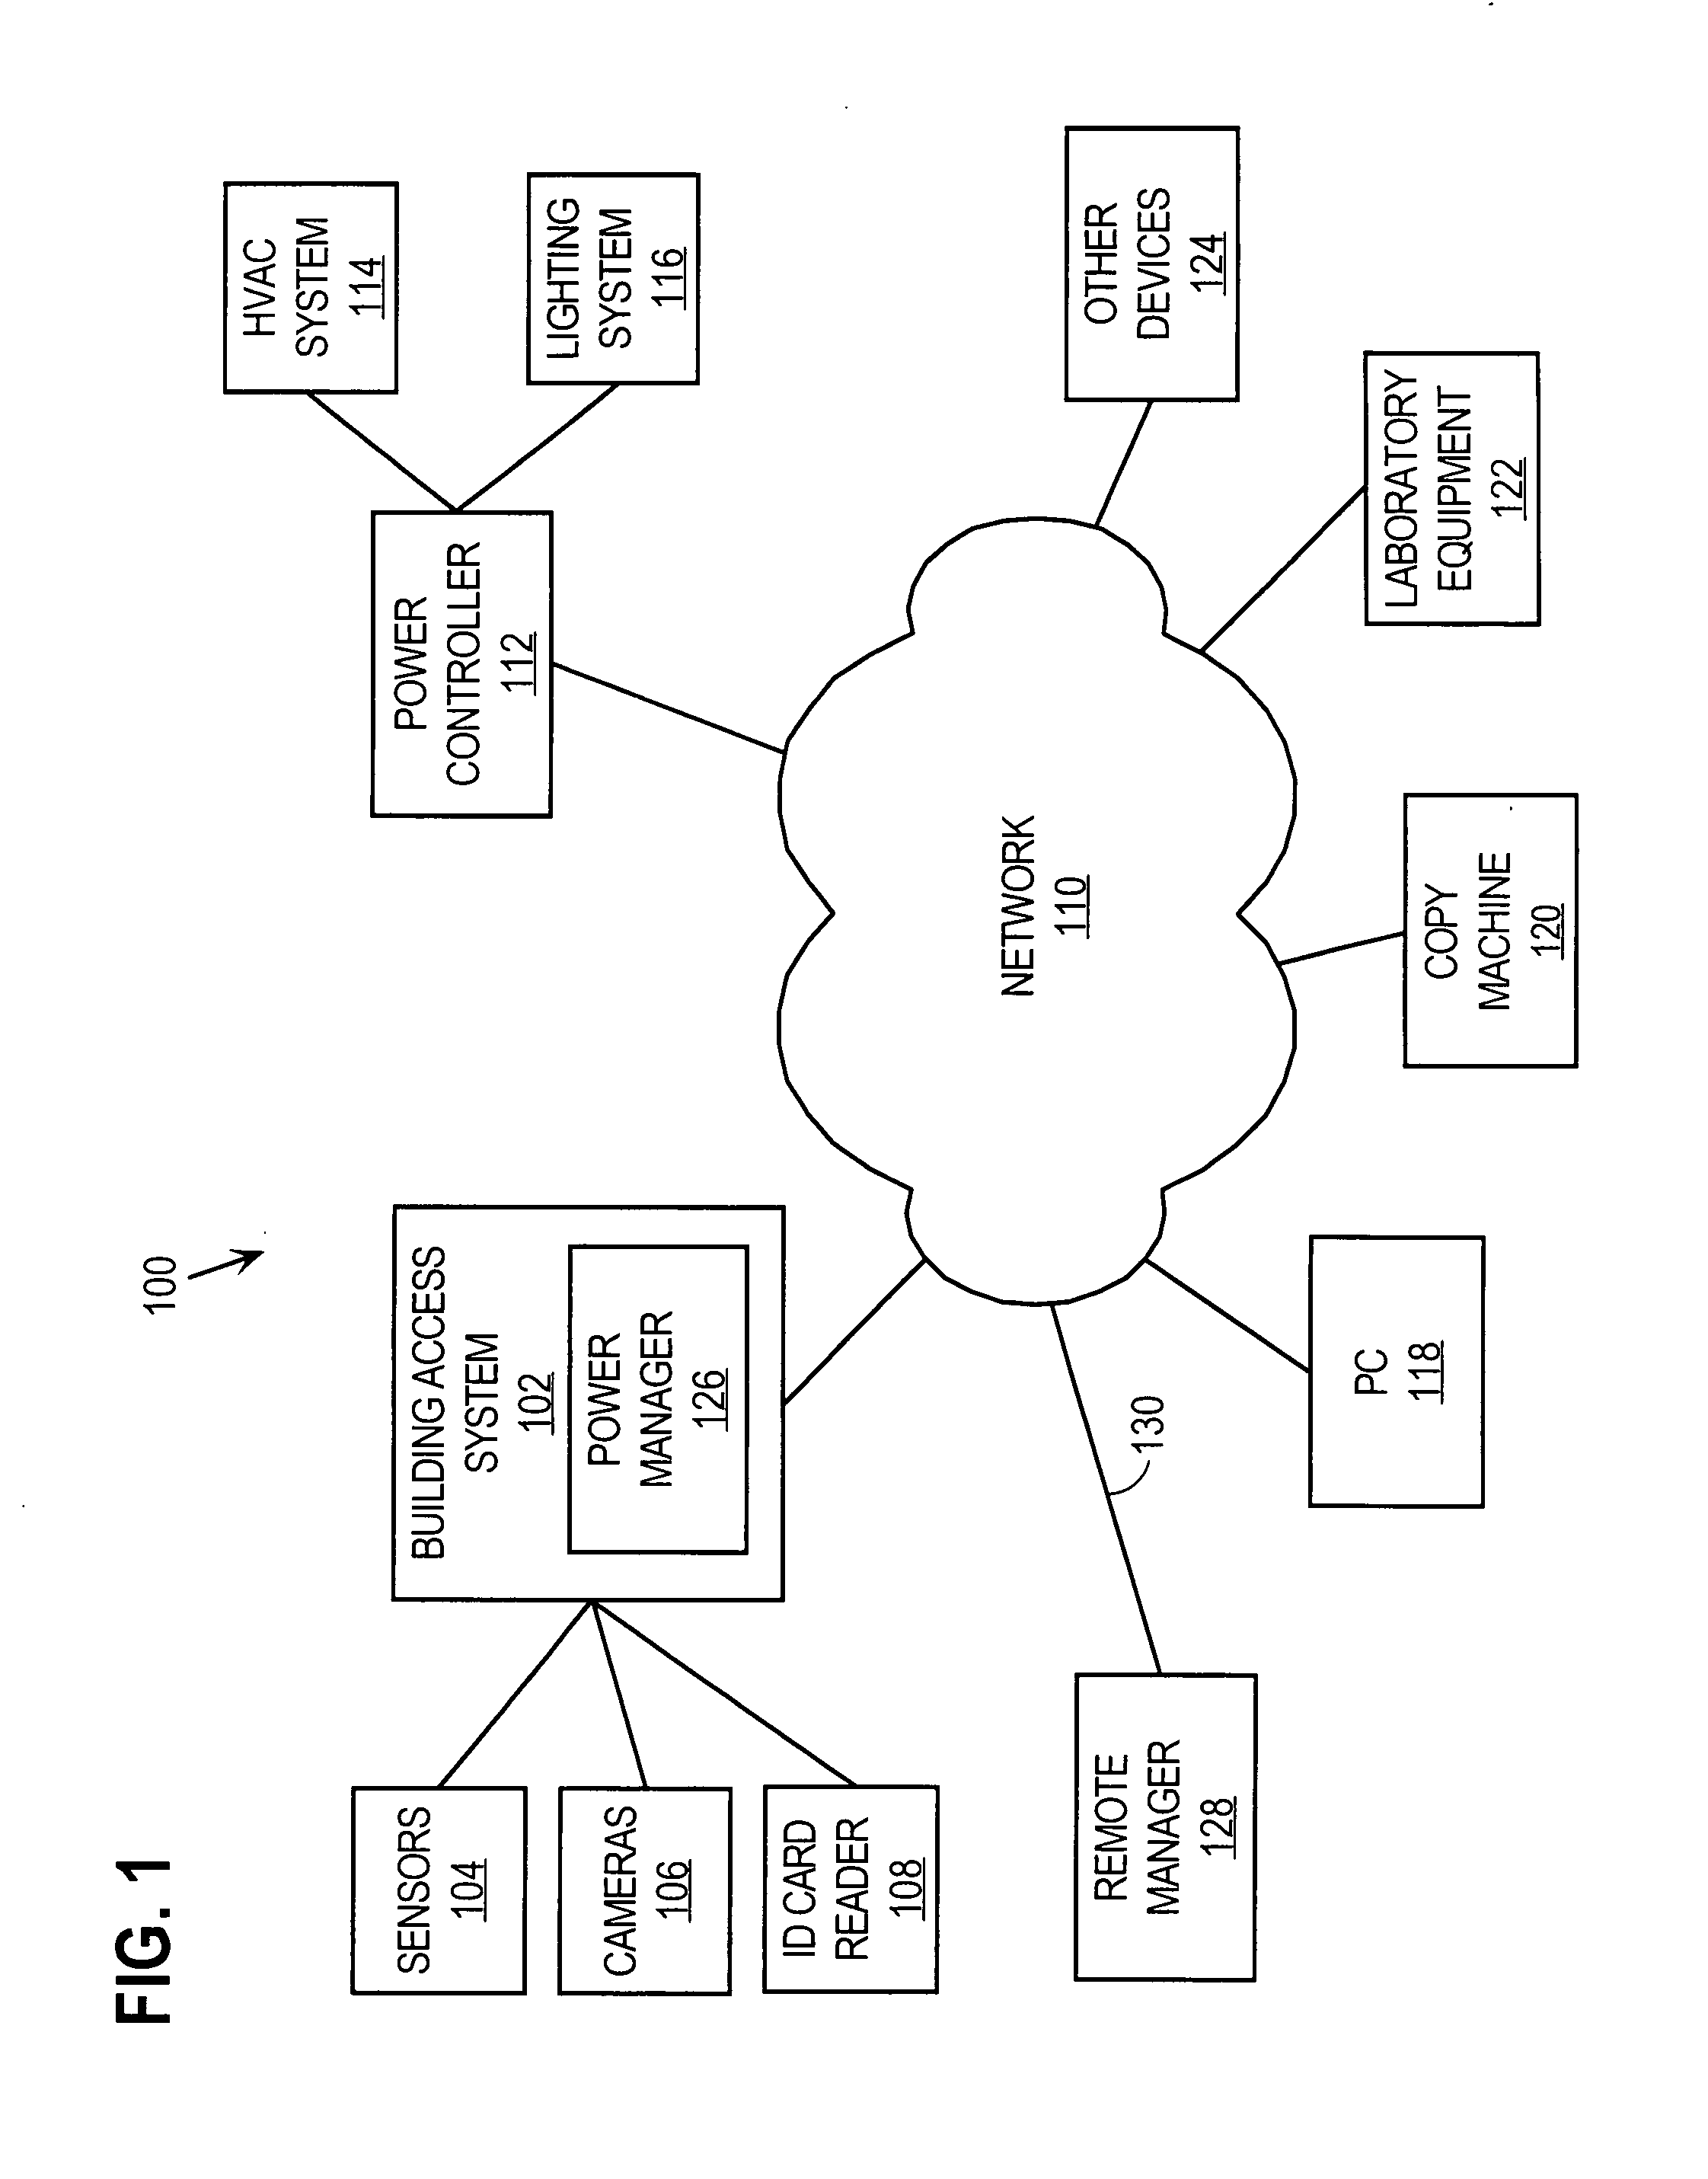 Pre-activation of network devices